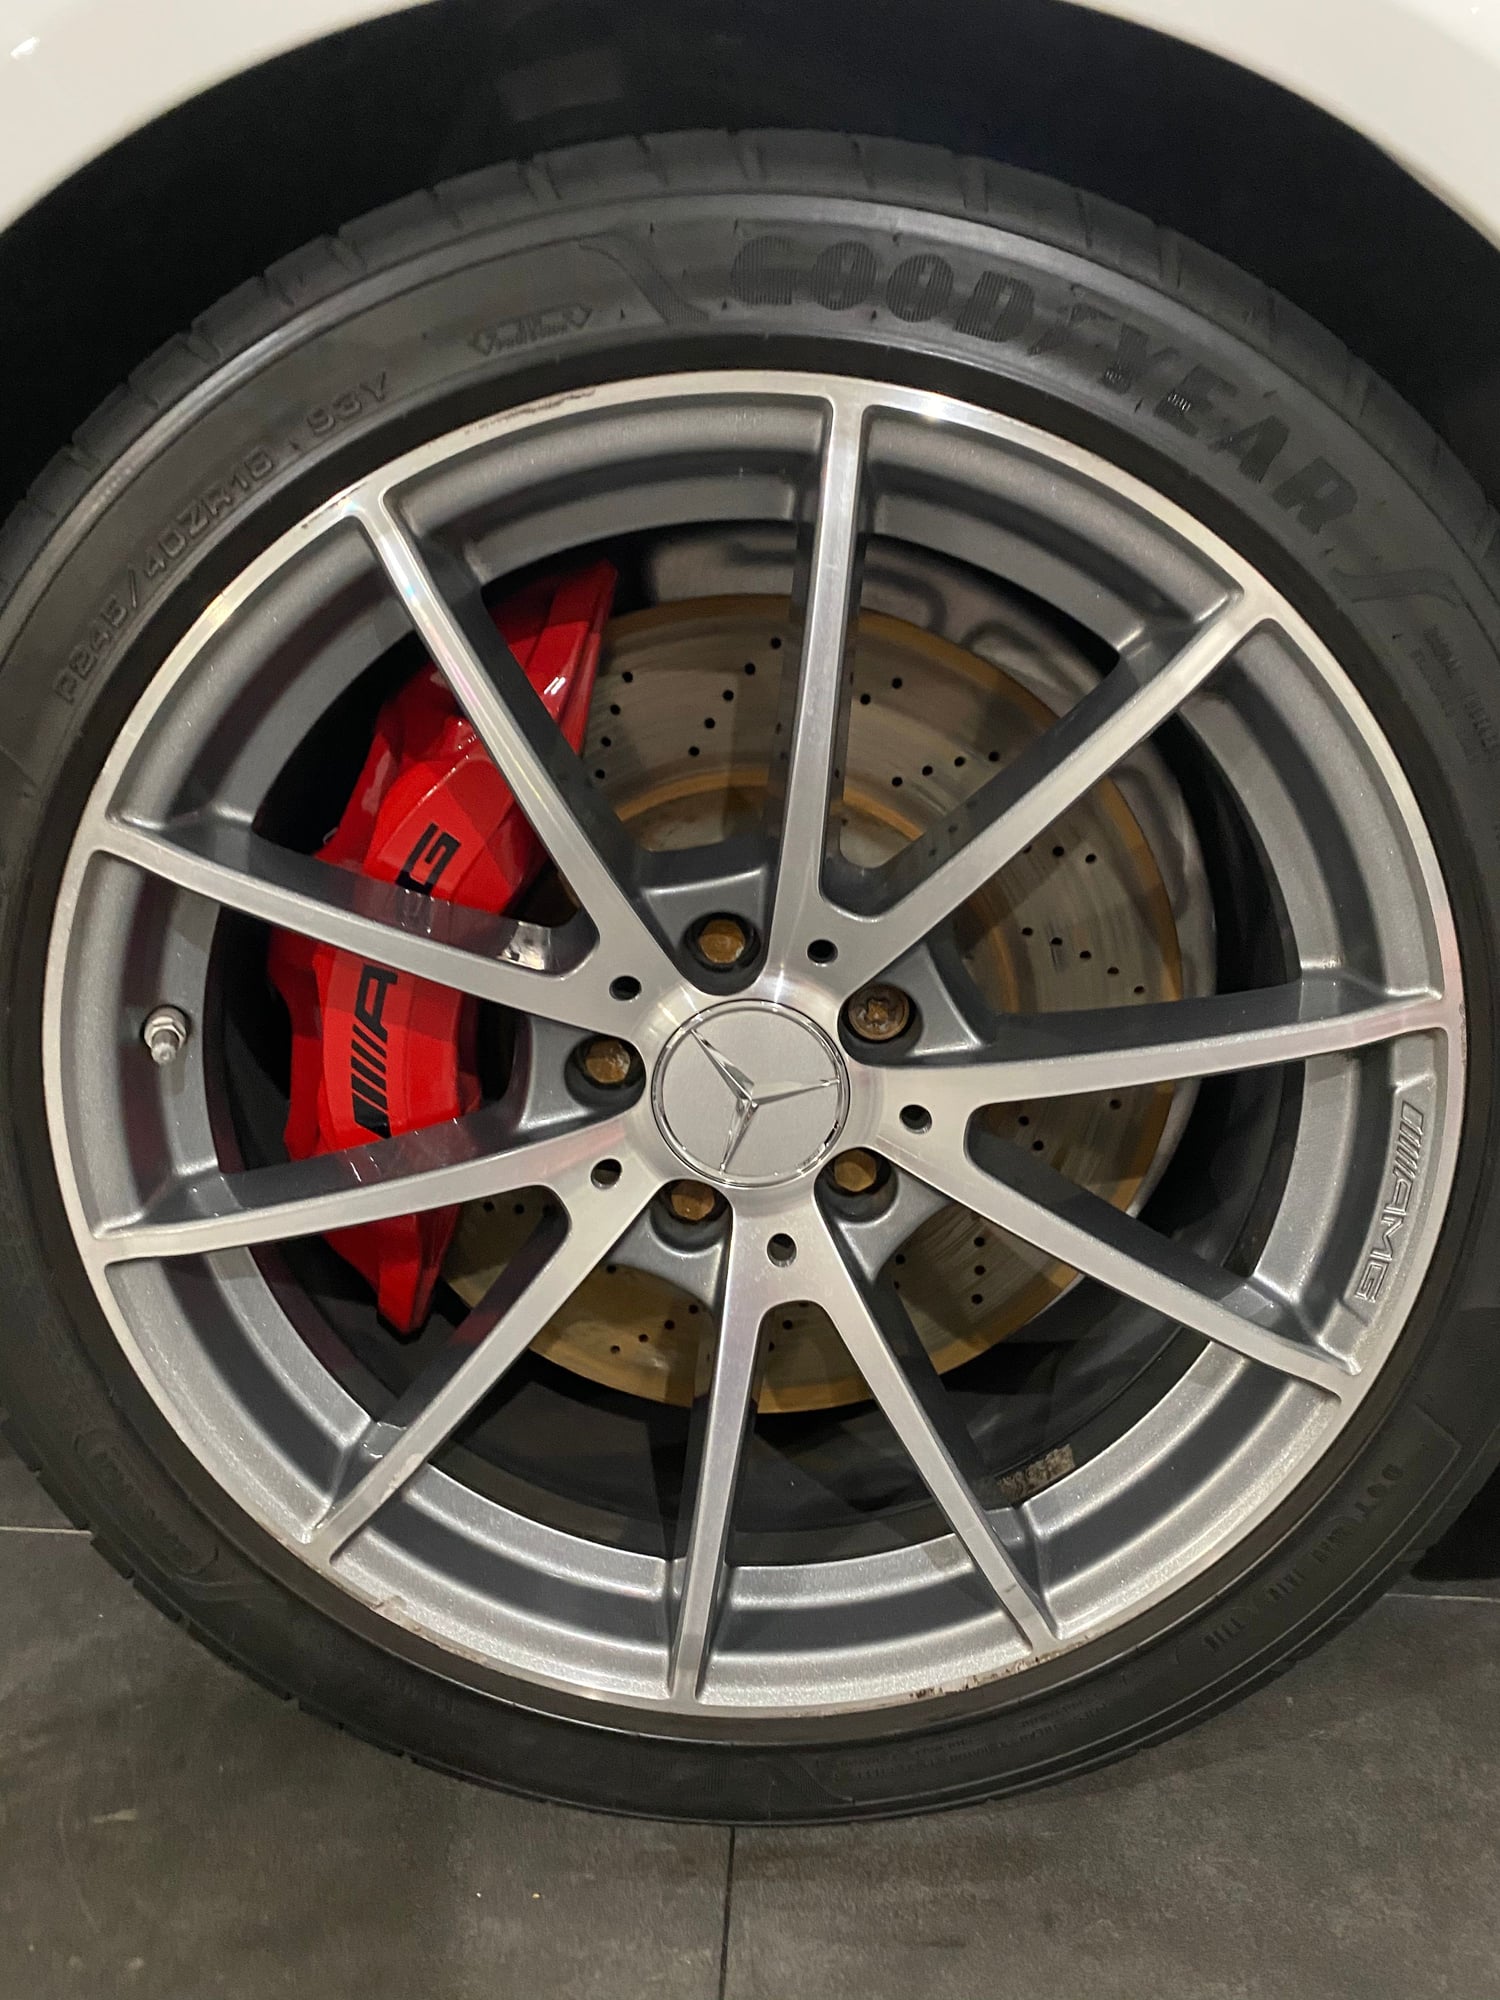 Wheels and Tires/Axles - Mercedes C63 AMG Forged Wheels + Tires OEM - Used - 2008 to 2020 Mercedes-Benz C63 AMG - Fountain Valley, CA 92708, United States